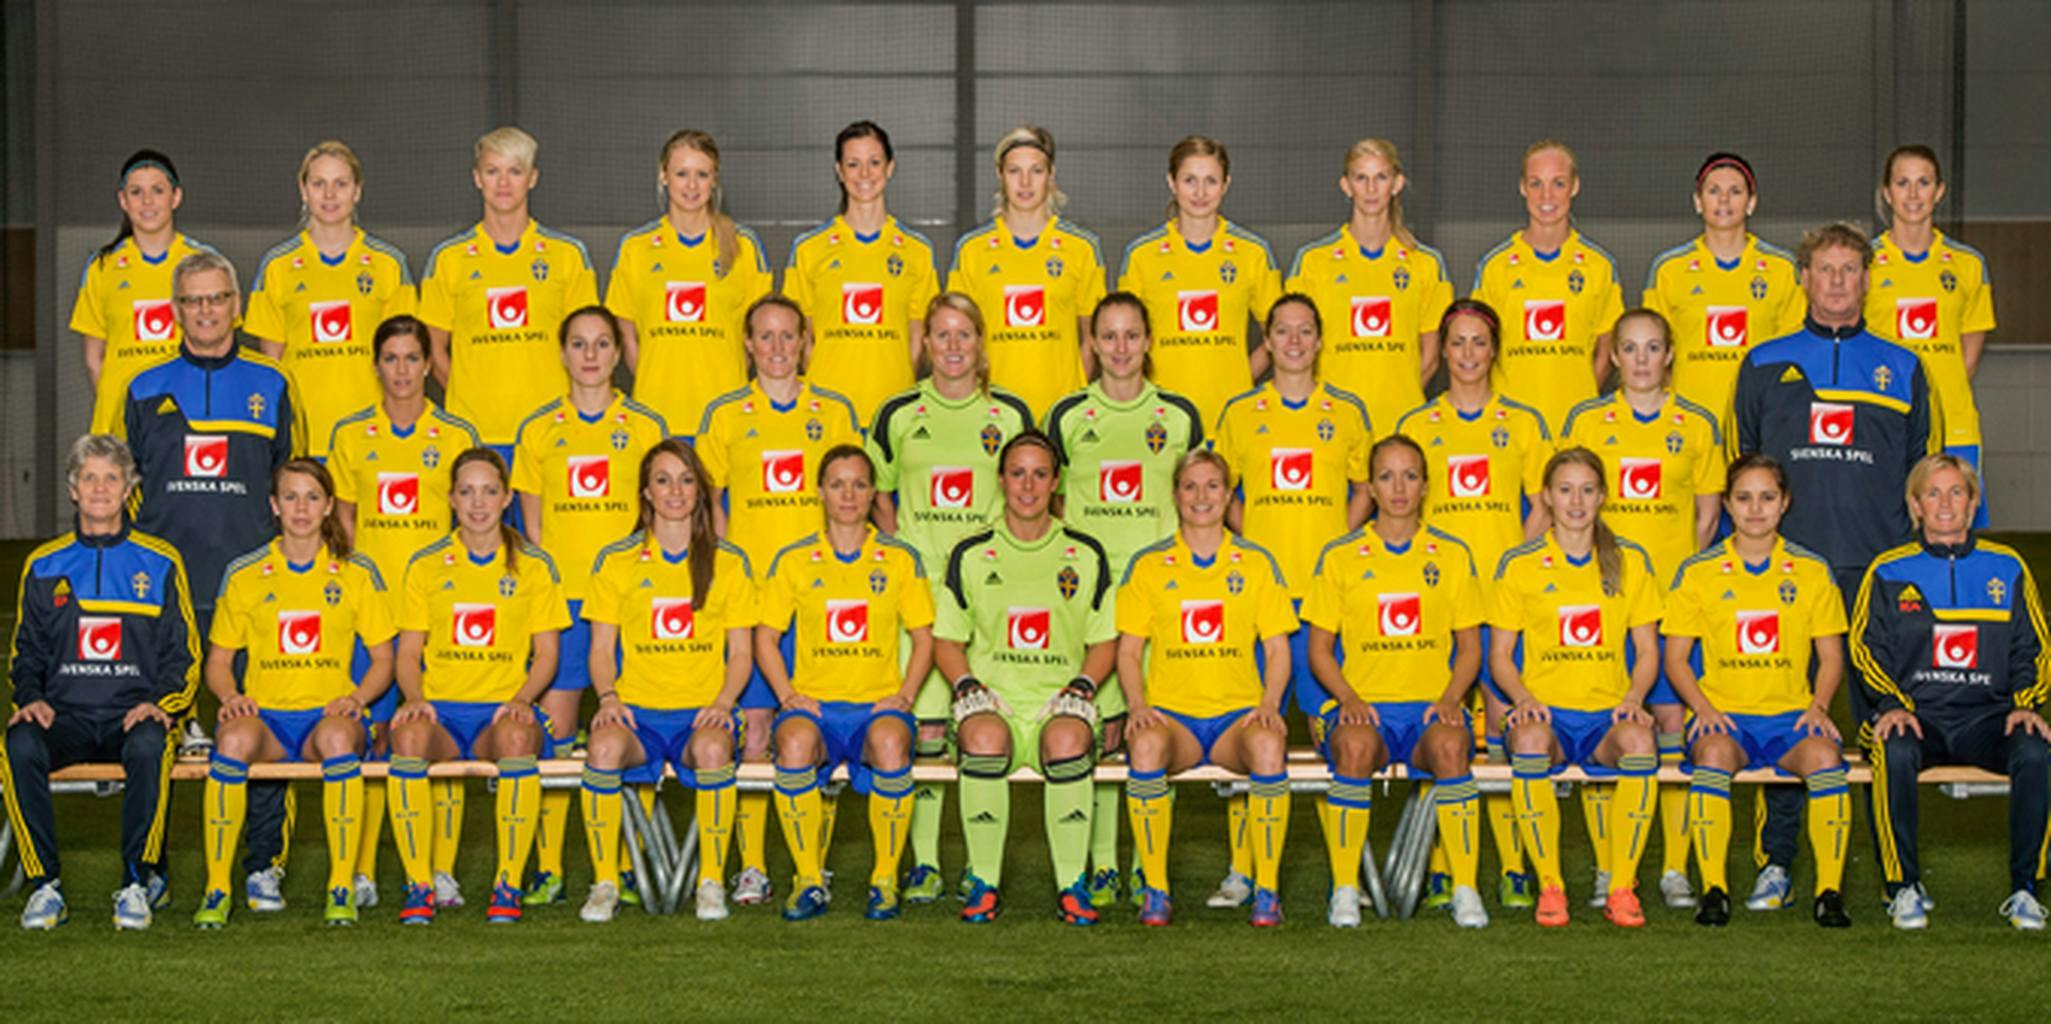 Sweden's Twitter lashes out at national women's soccer team - The Daily Dot